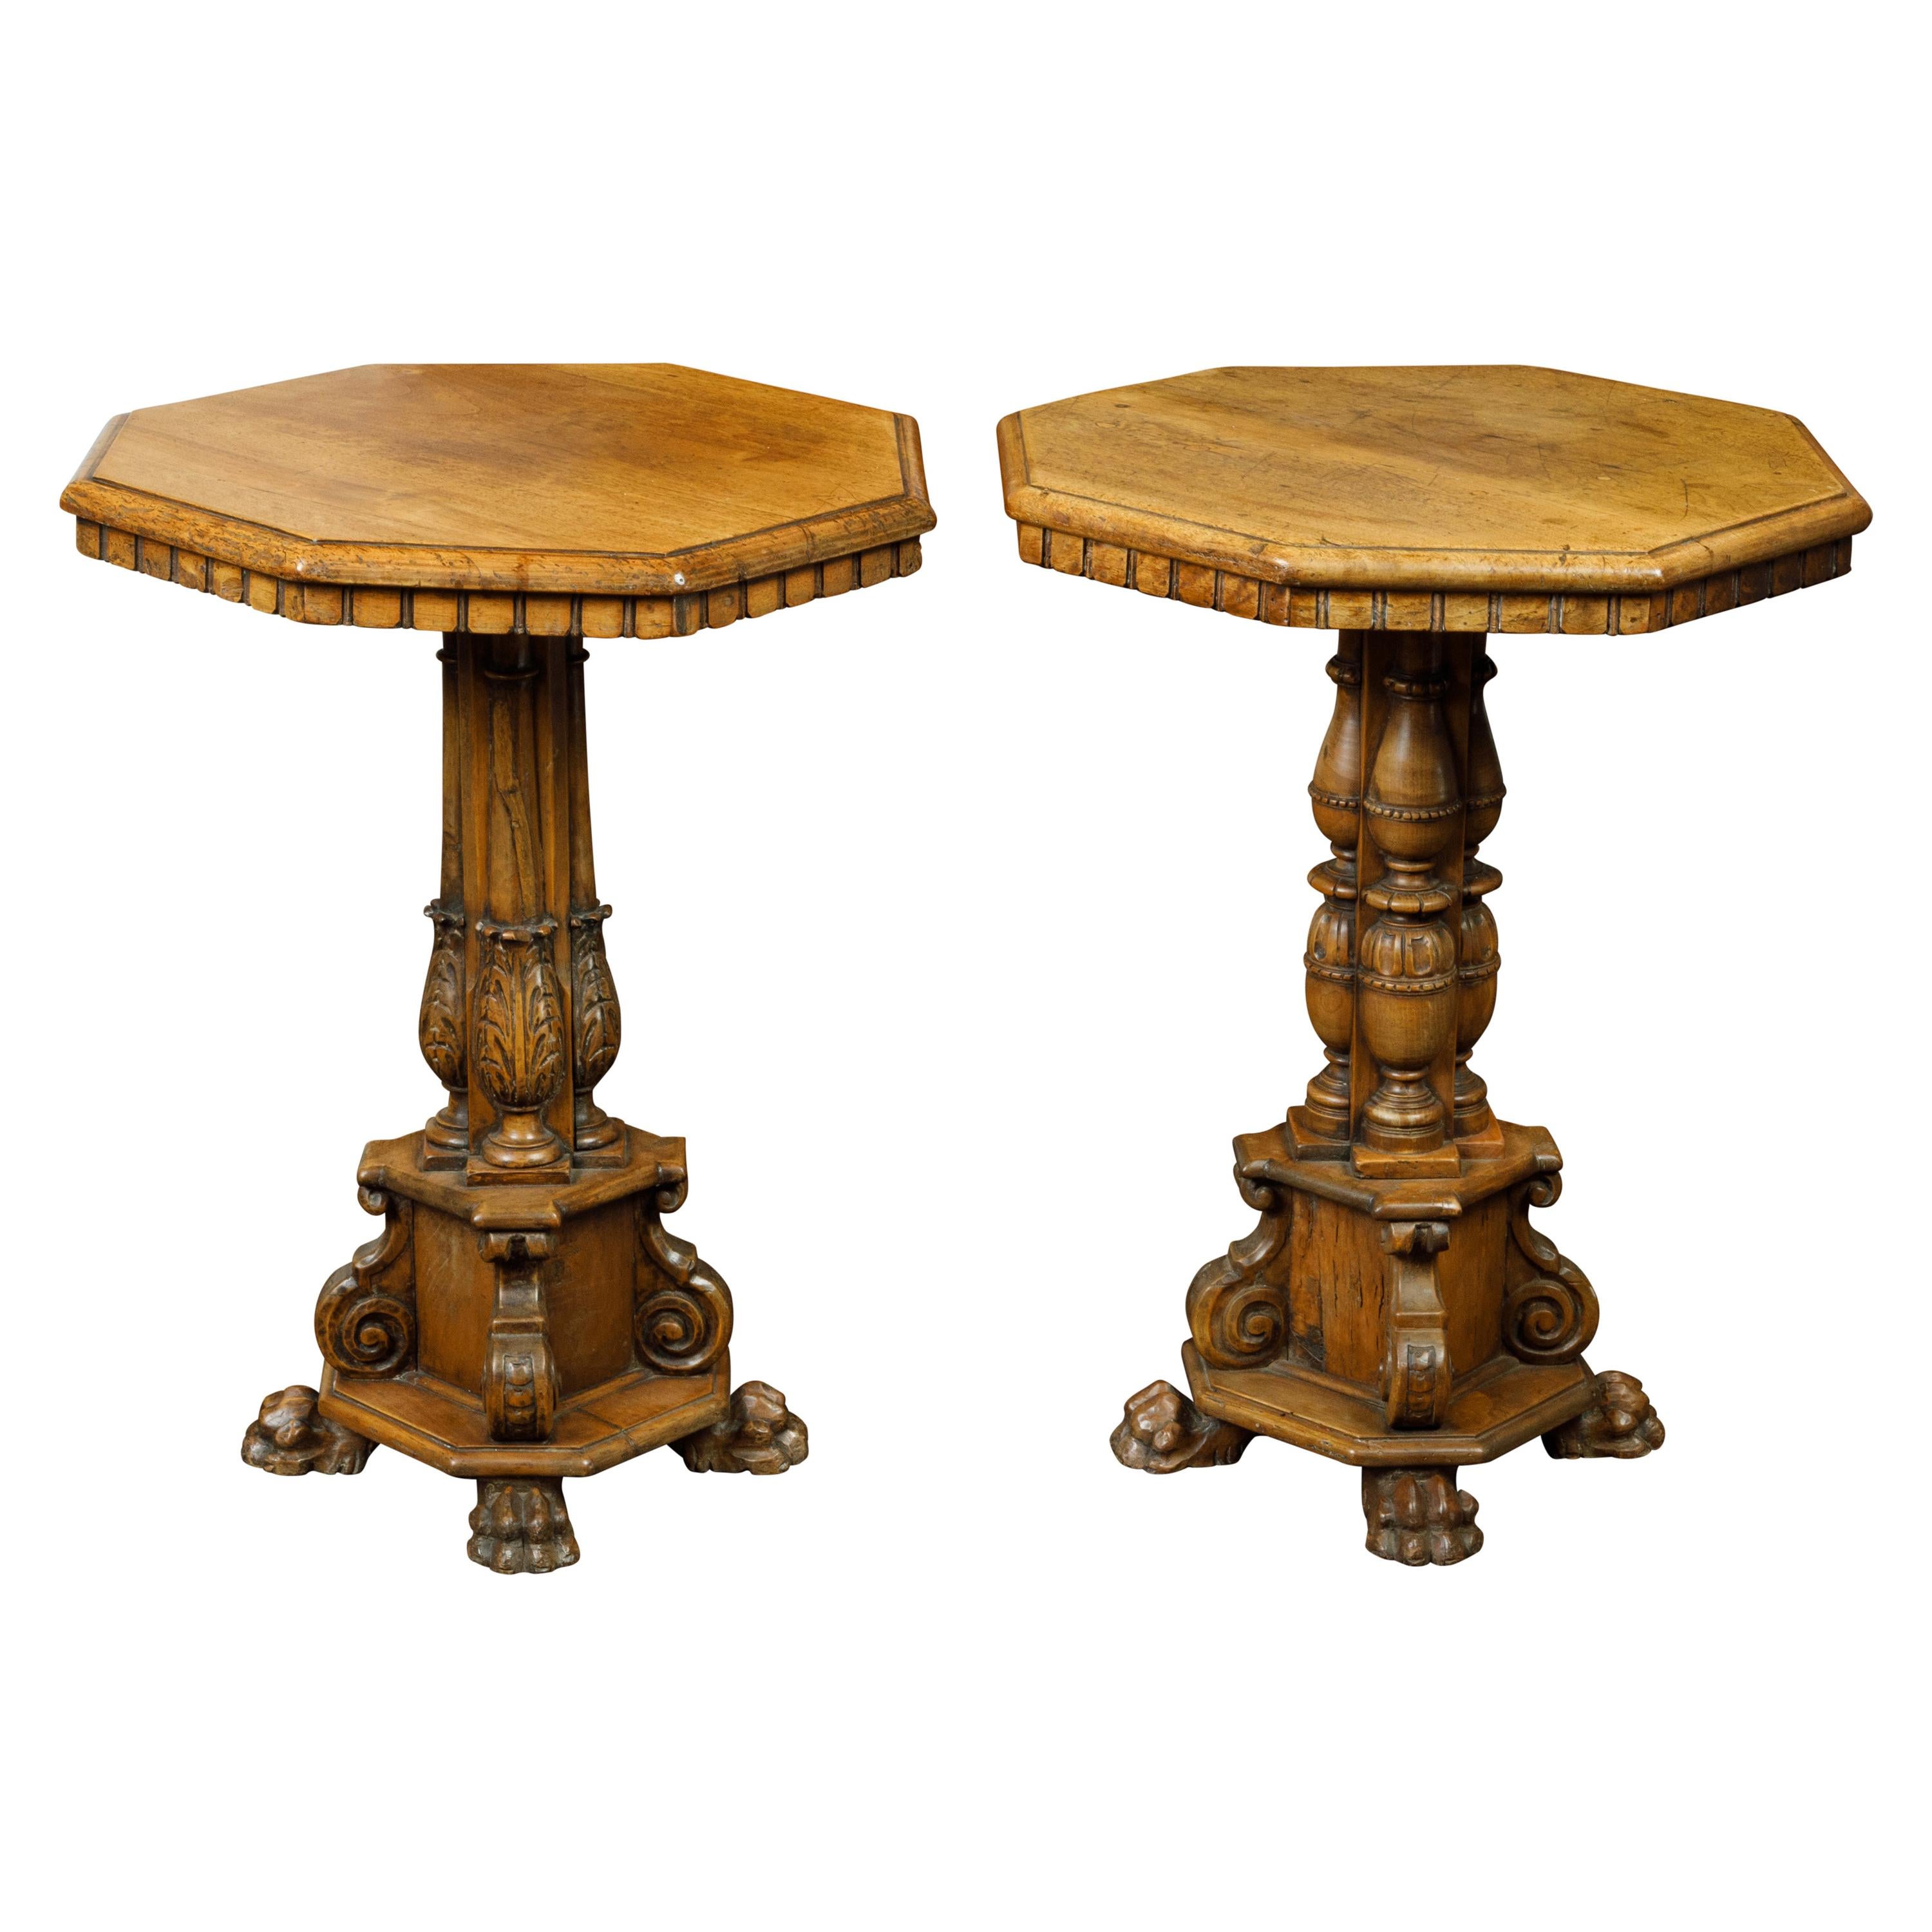 Pair of 19th Century Italian Walnut Guéridons with Octagonal Top and Ornate Base